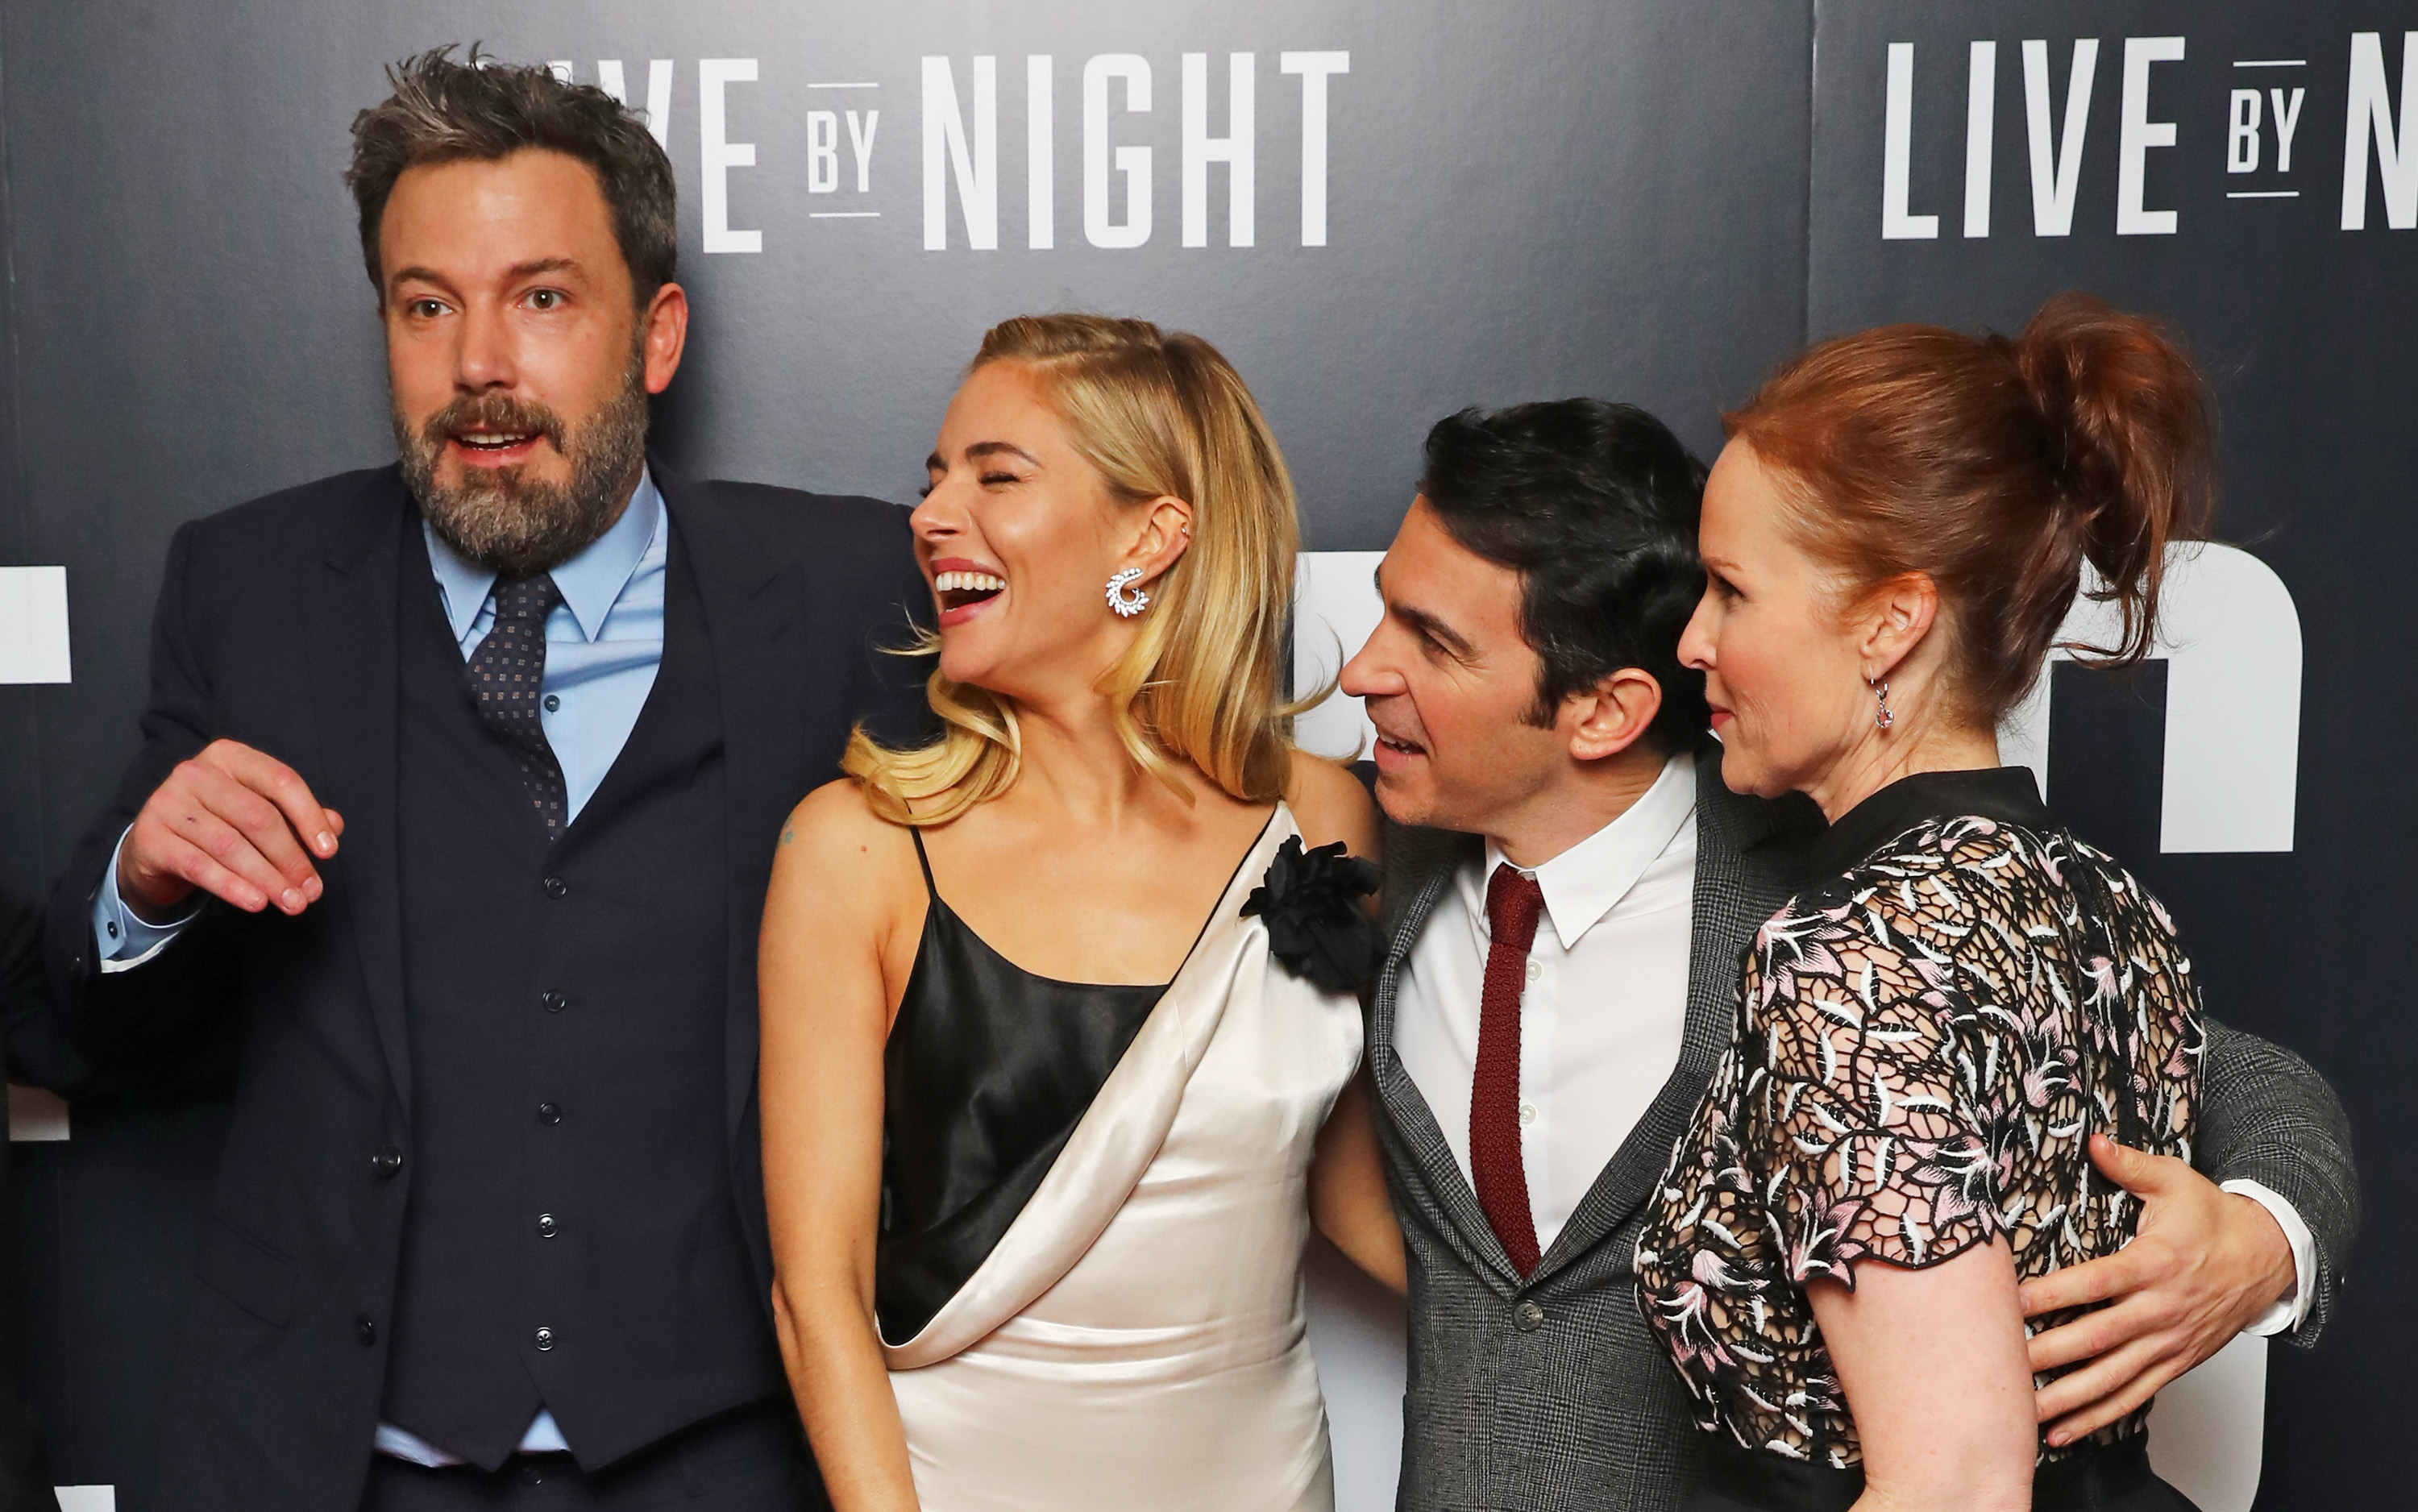 (L to R) Ben Affleck, Sienna Miller, Chris Messina and Jennifer Todd attend the European premiere of "Live By Night" at BFI Southbank, on January 11, 2017, in London, United Kingdom. | Source: Getty Images